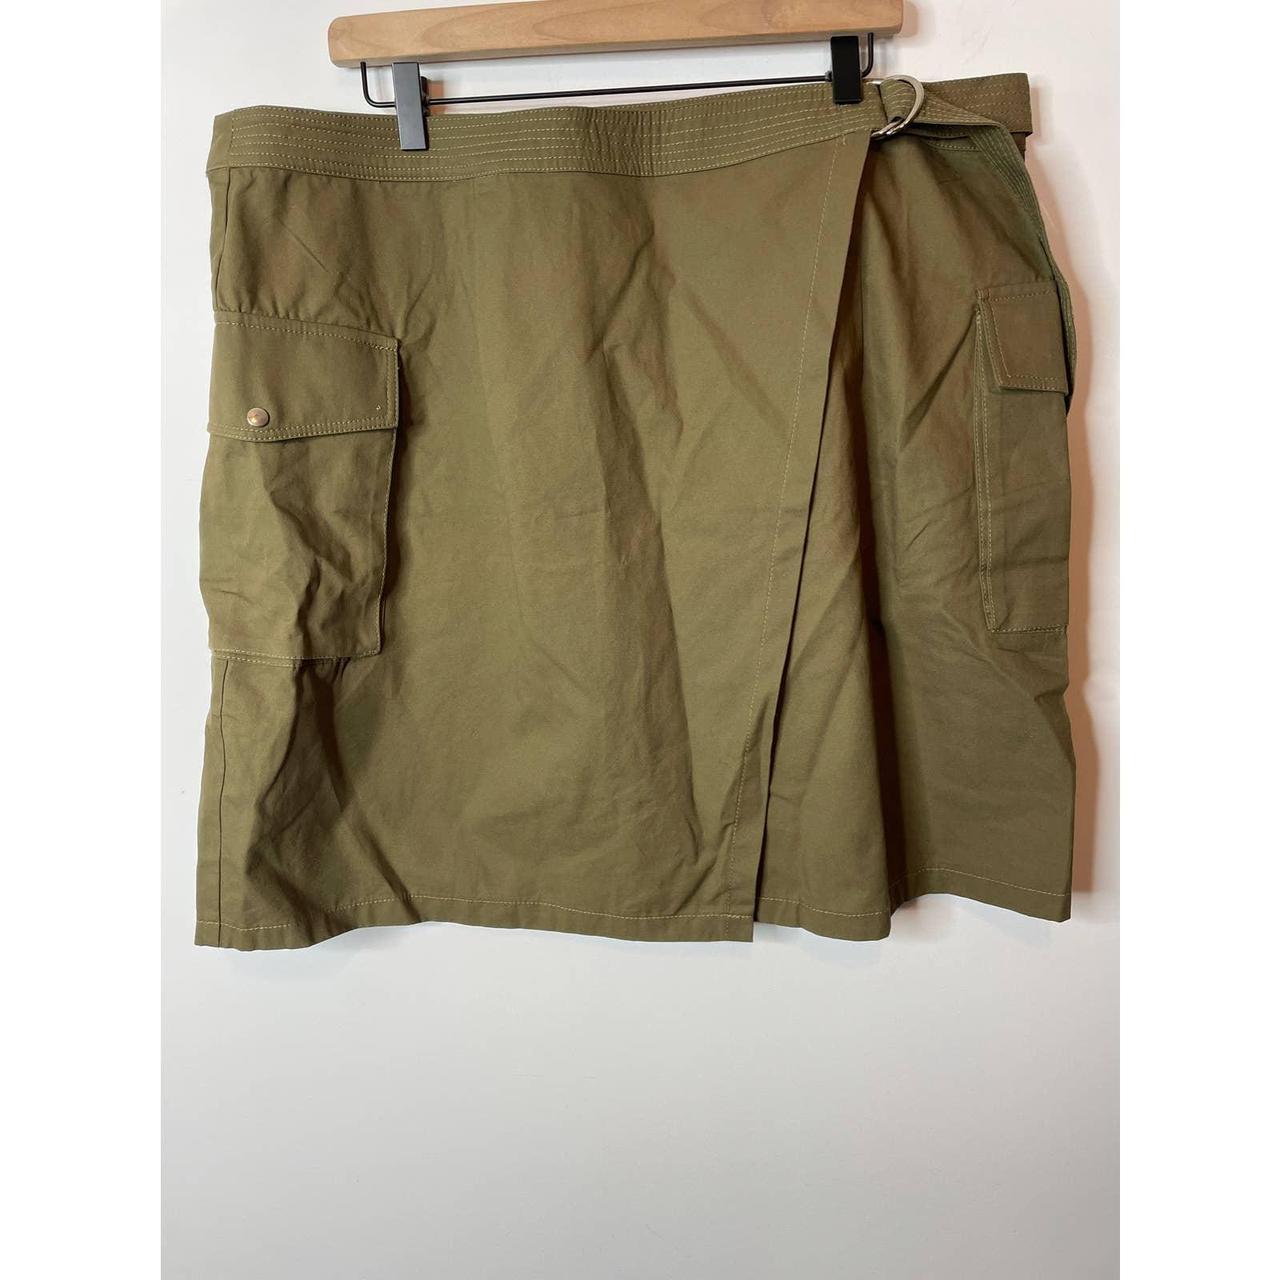 Product Image 2 - City Chic
Khaki
Green in color
High waisted
Pockets
Belted
Above